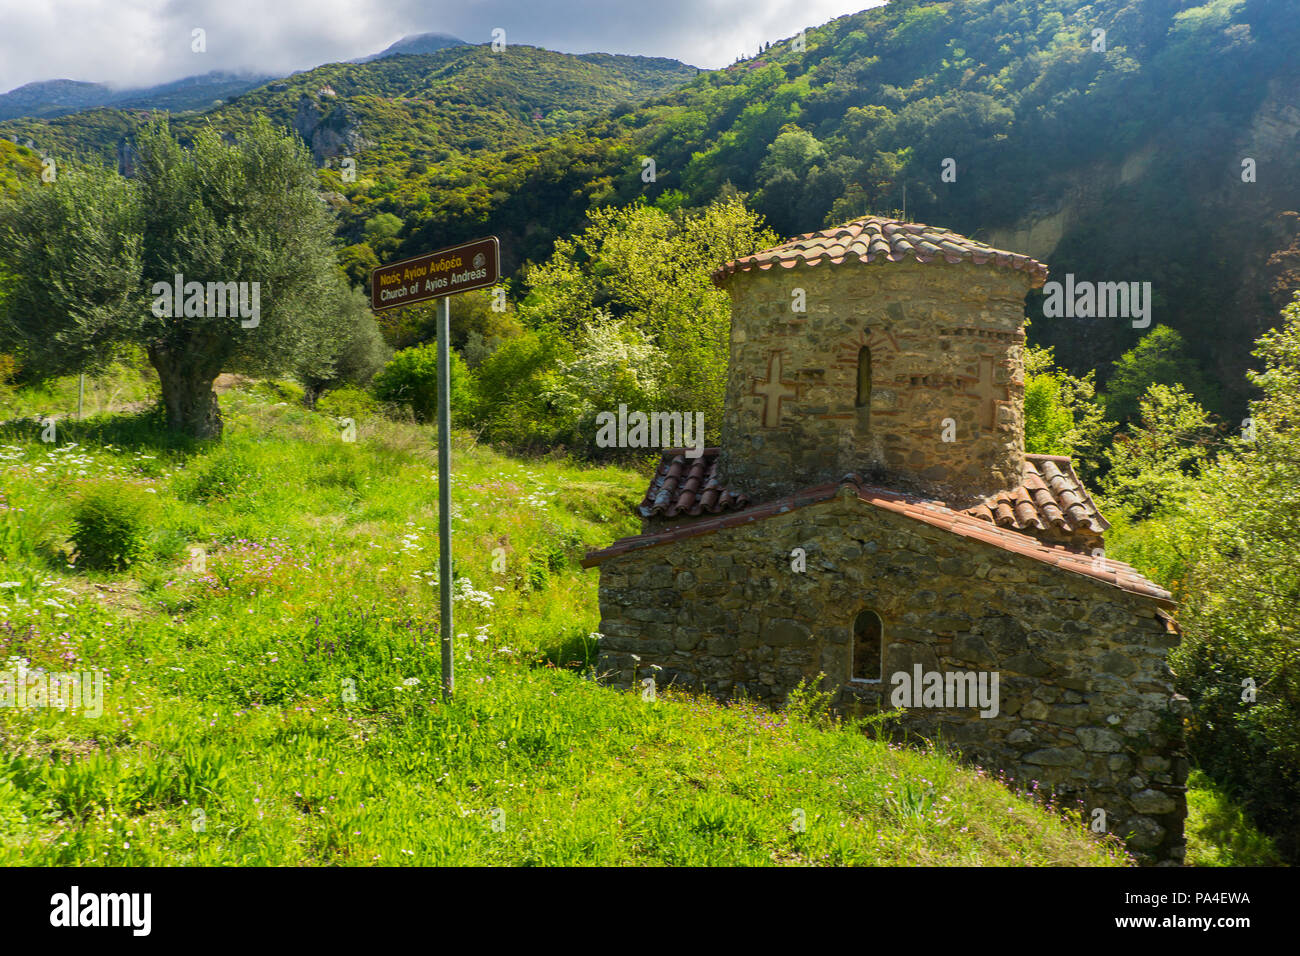 Old Saint Andrew church dates from the 11th century on the banks of the Lousios River in Arcadia prefecture in Peloponnese Greece Stock Photo